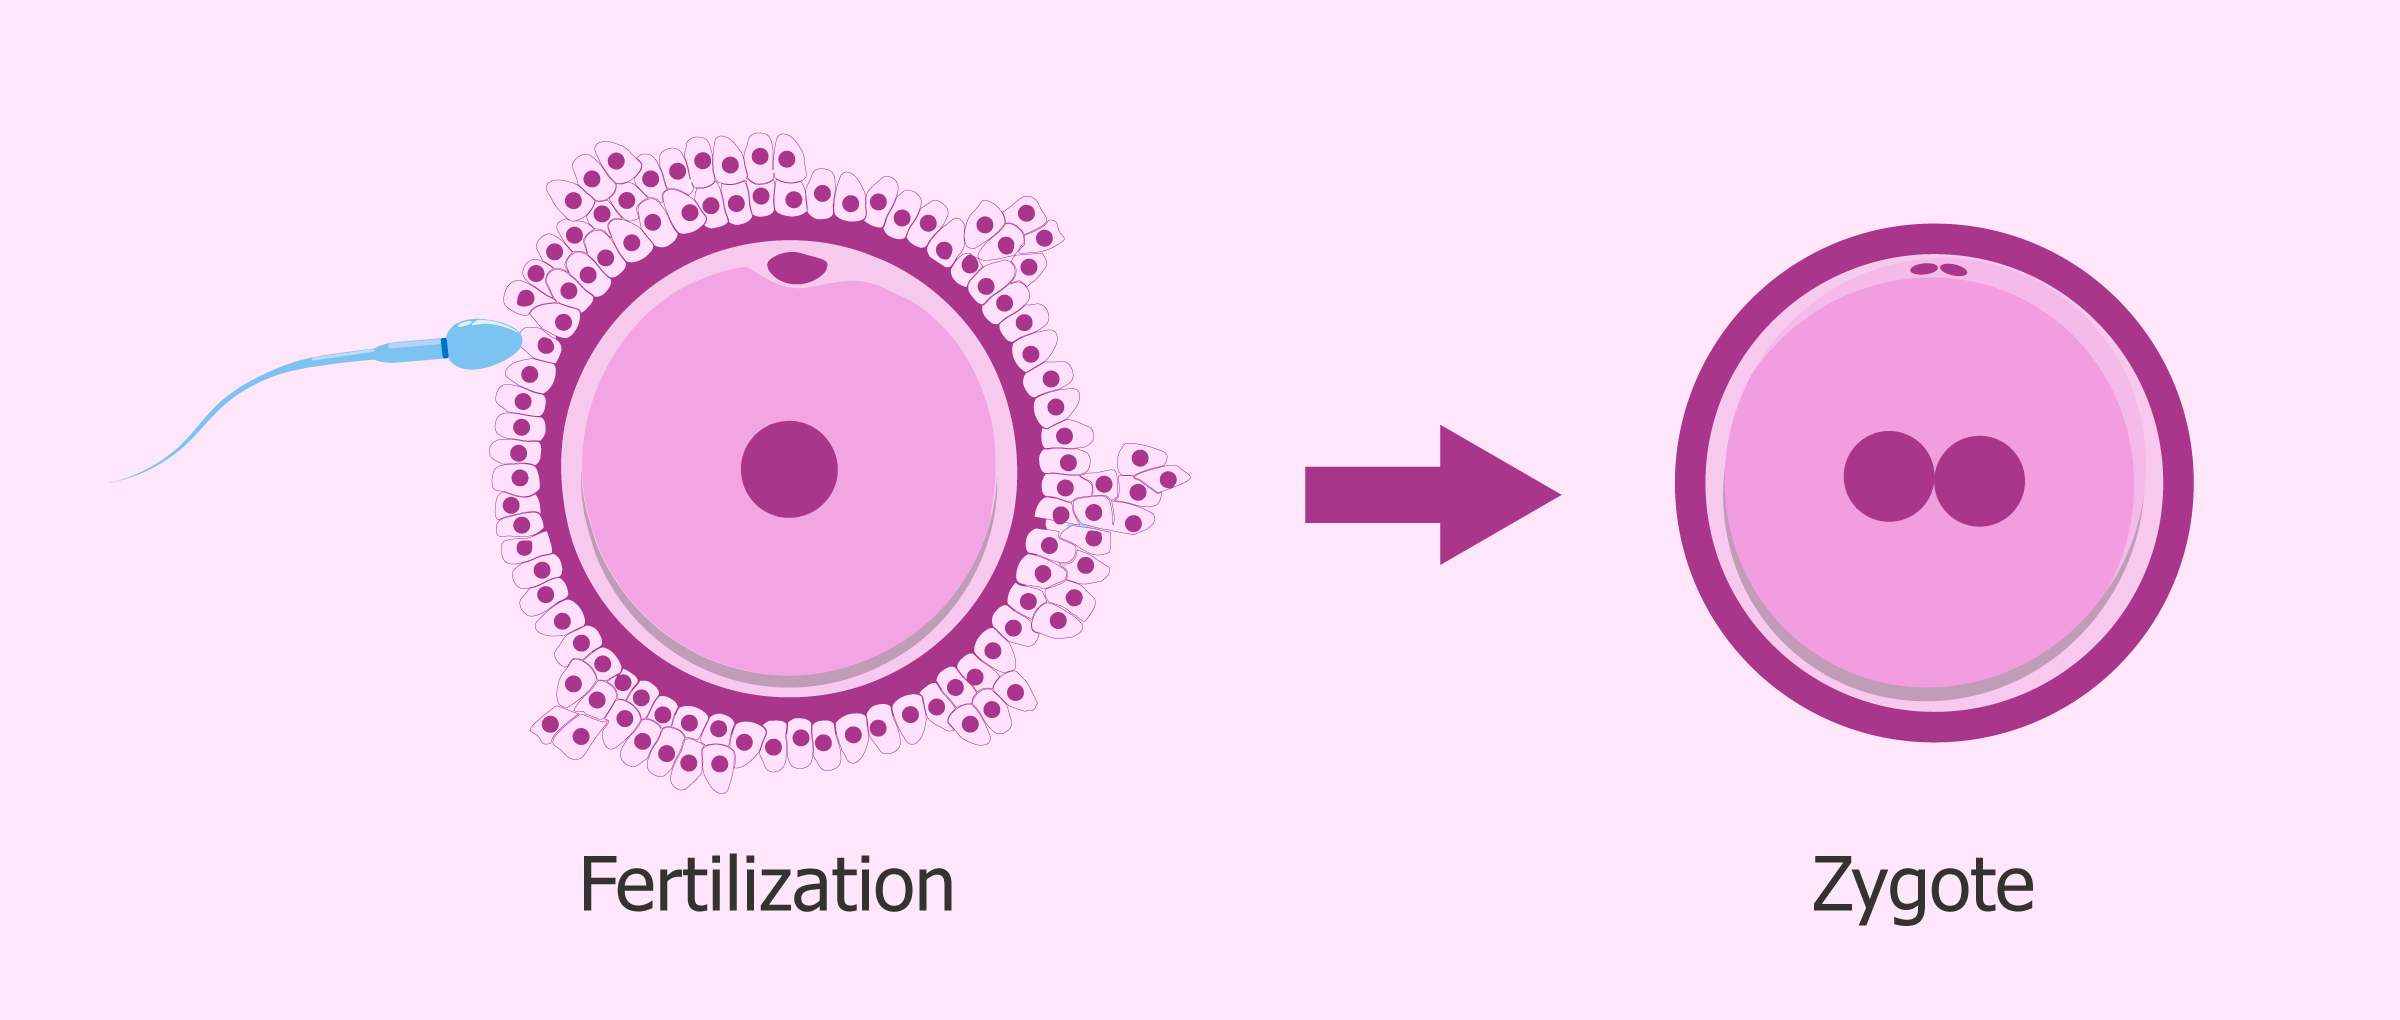 The zygote: first stage of embryo development after fertilization